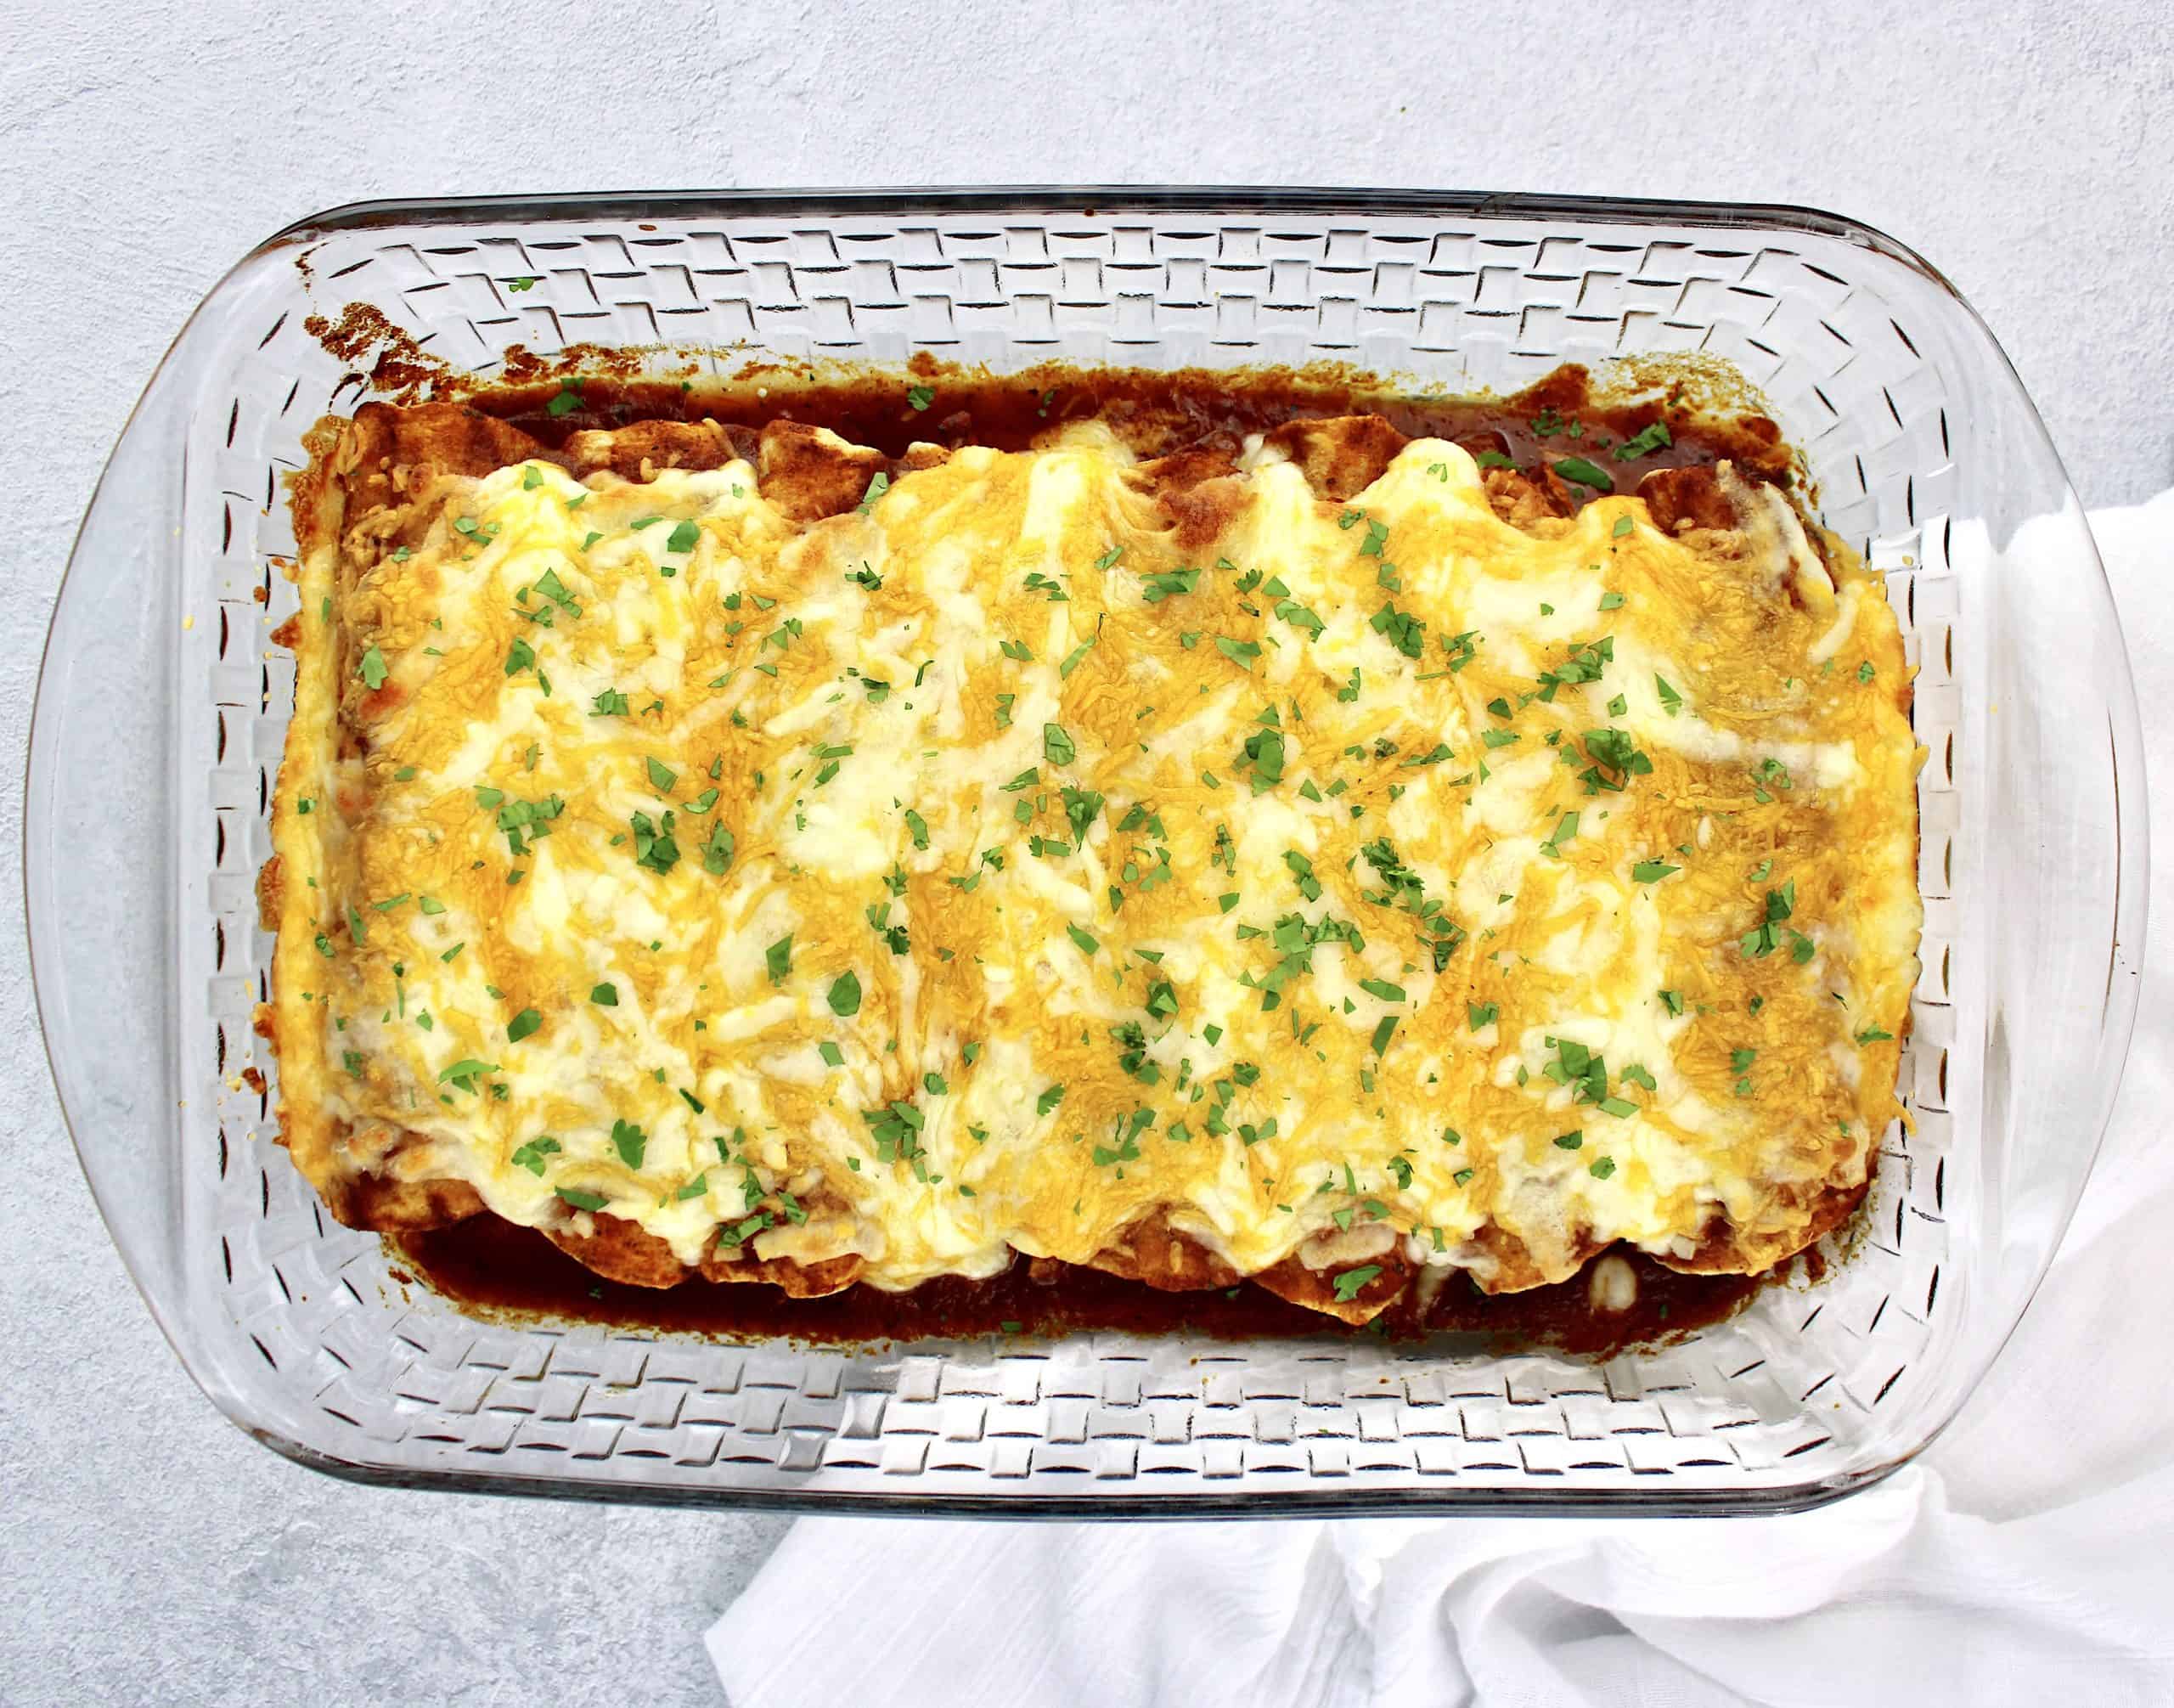 8 Keto Chicken Enchiladas baked with cheese on top with chopped cilantro garnish